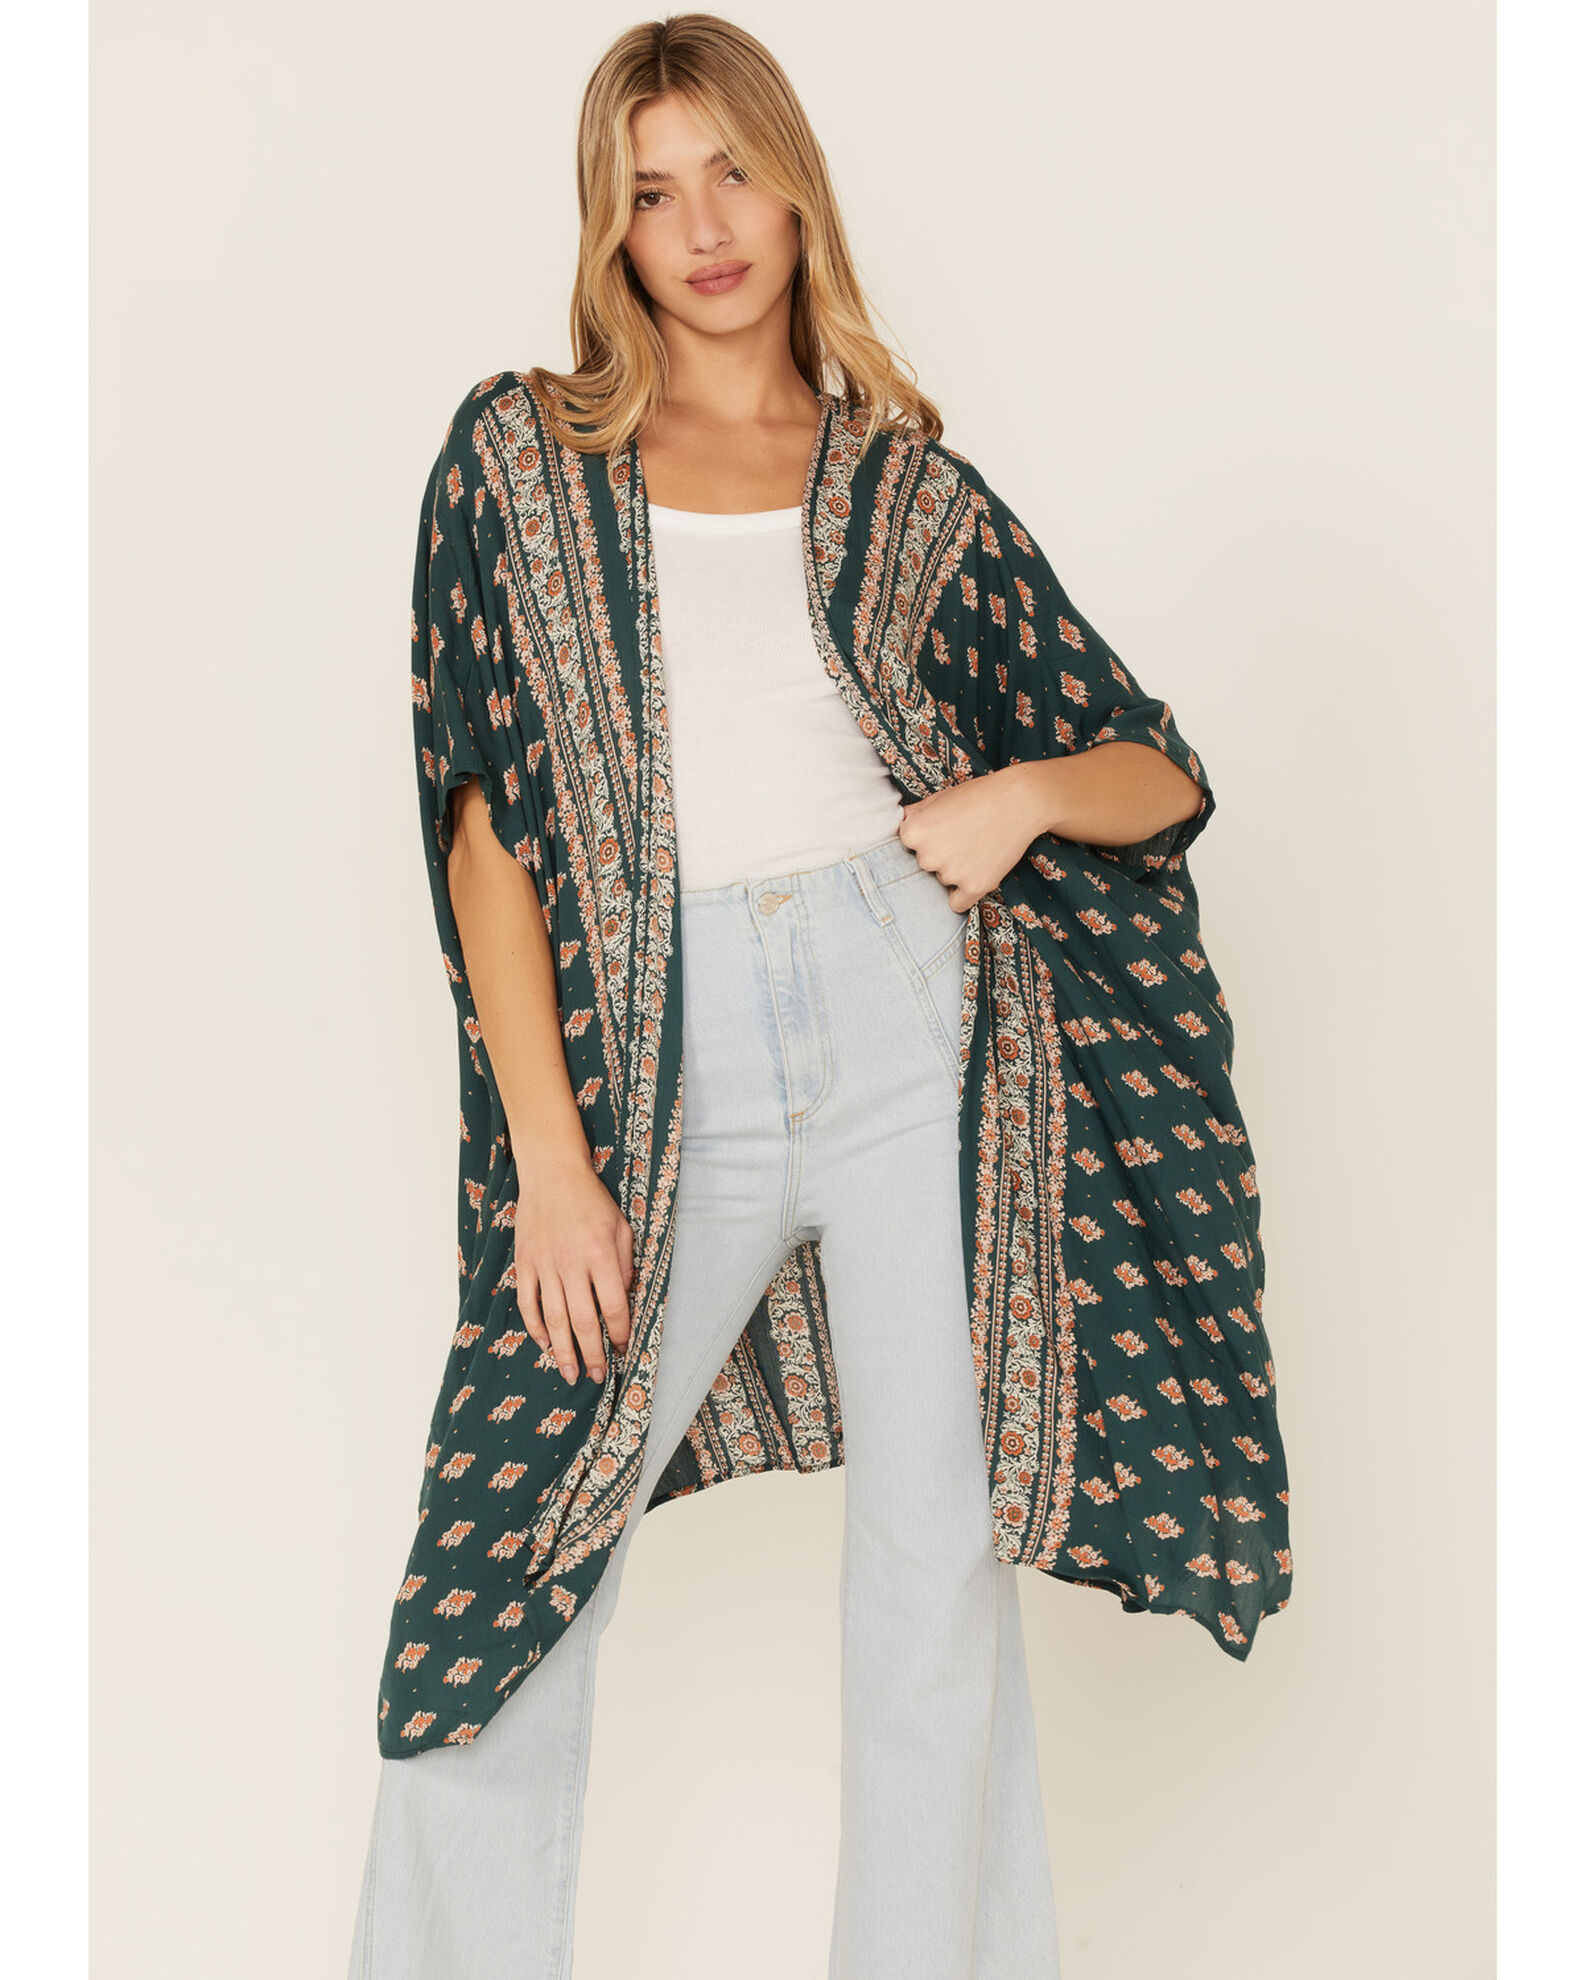 Angie Women's Floral Print Kimono Duster - Country Outfitter